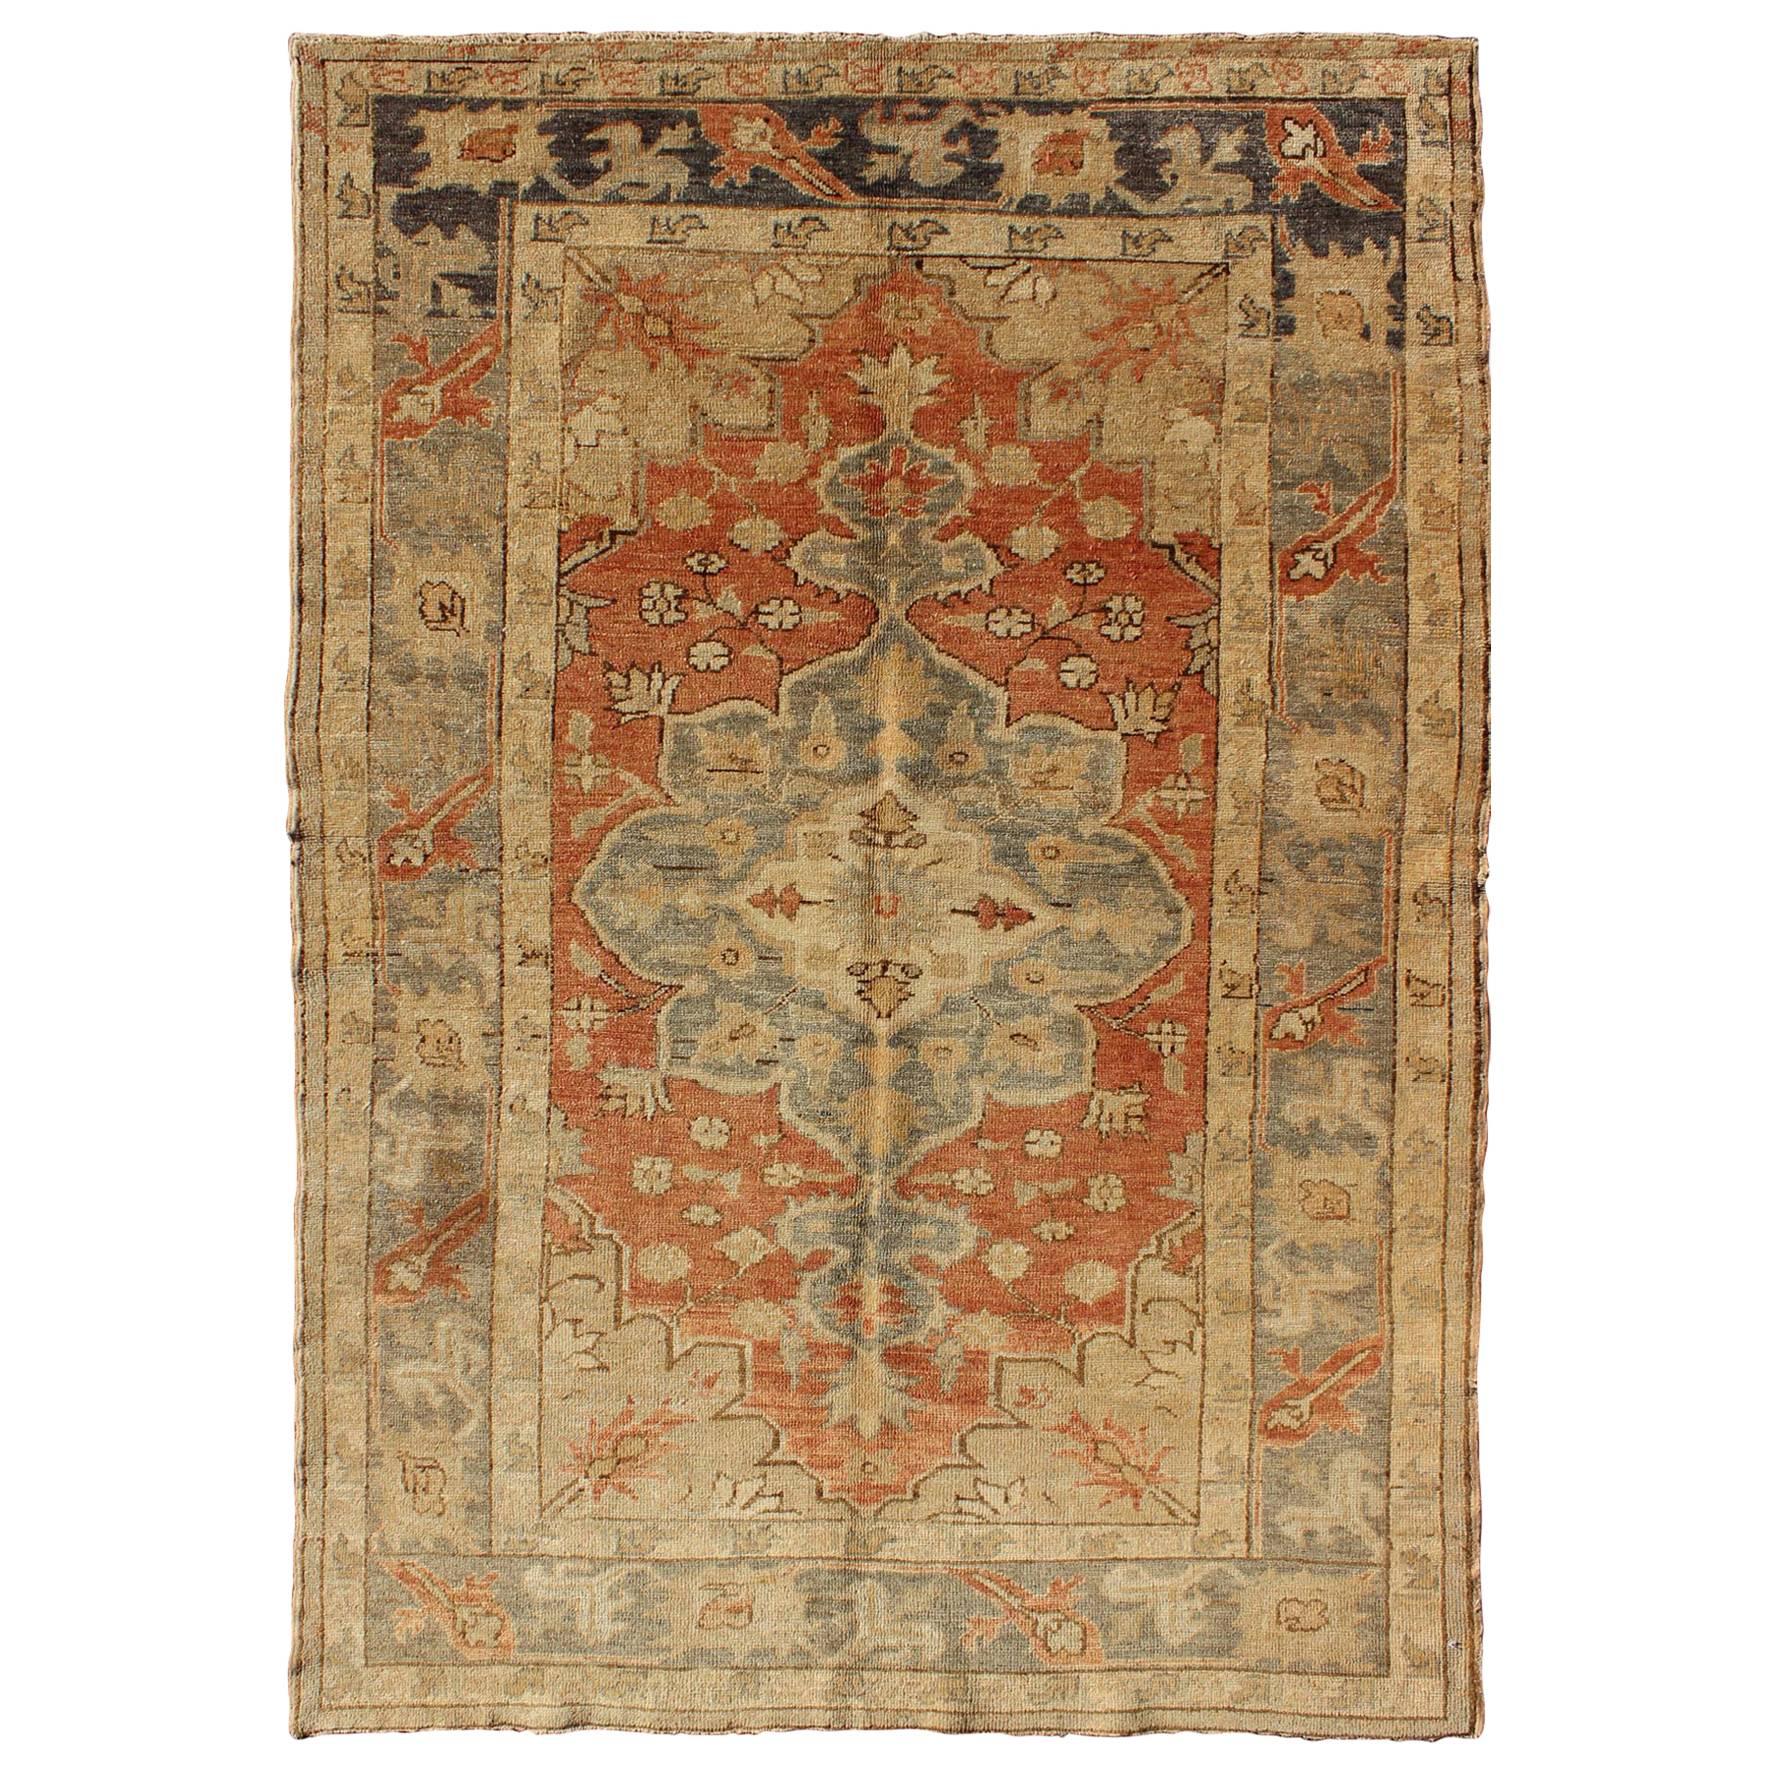 Antique Turkish Oushak Rug with Floral Motifs in Soft Orange, Grey and Taupe